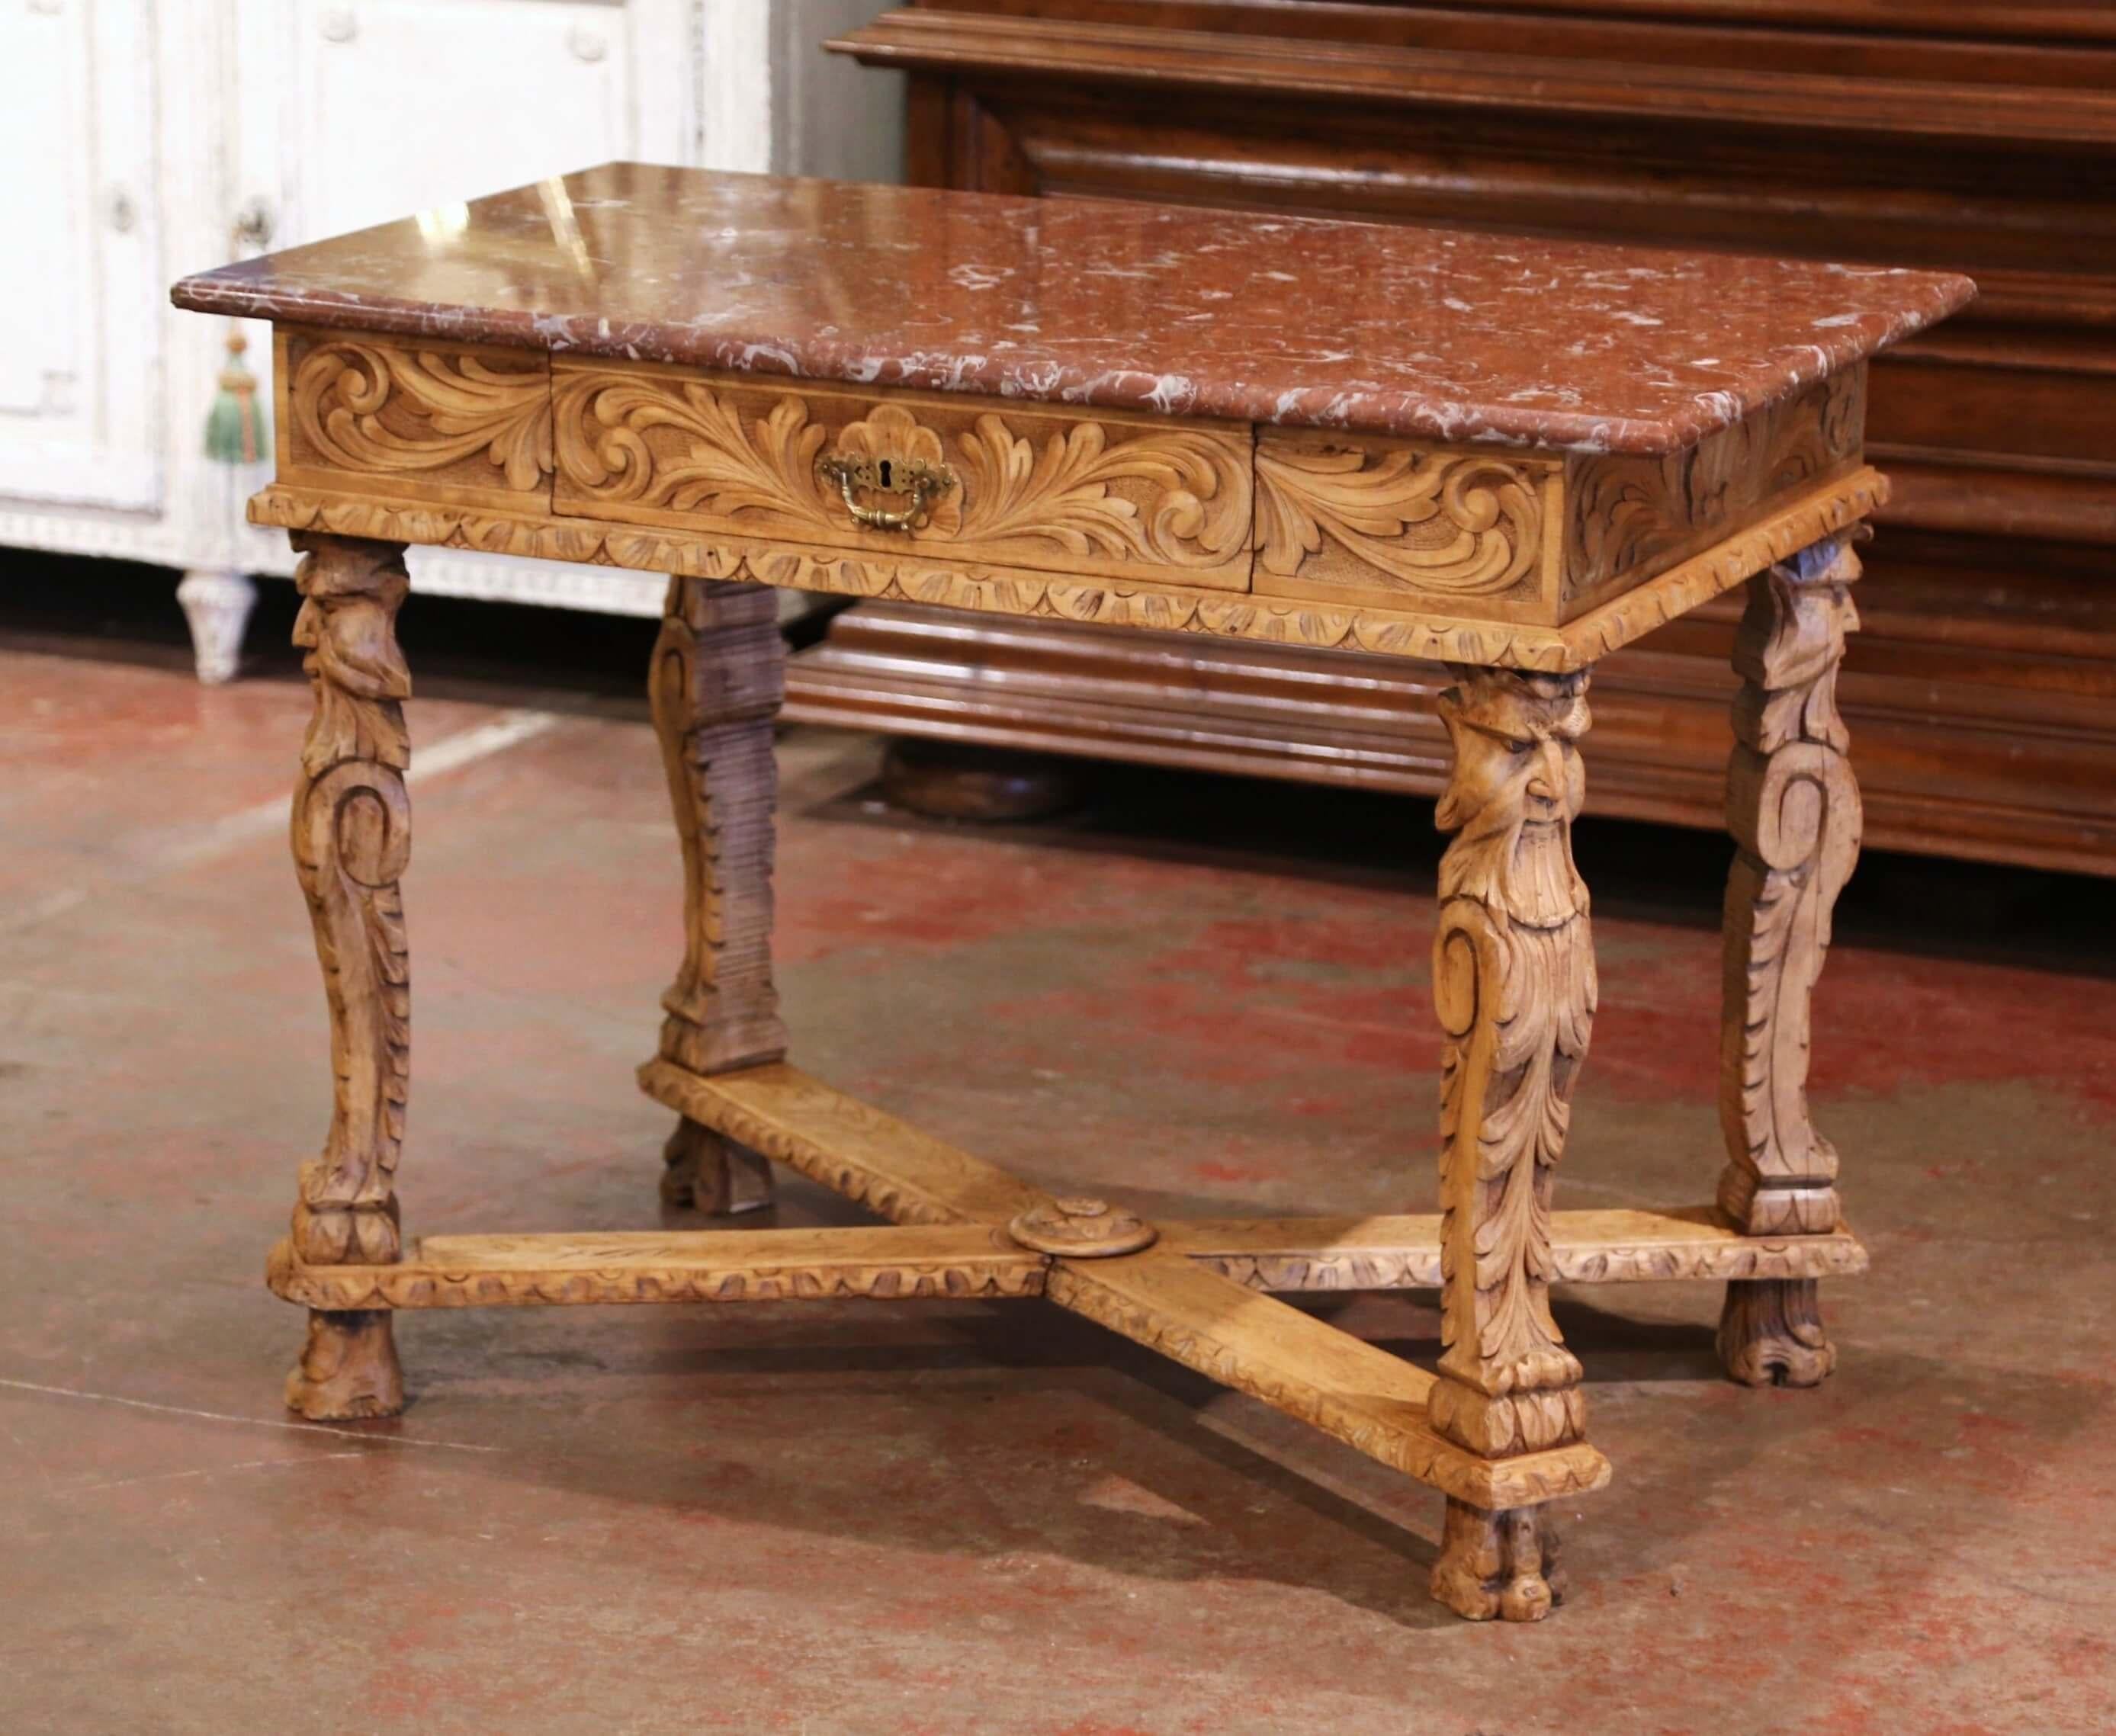 Decorate a study or office with this elegant antique side table from the Perigord region of France. Built of oak and heavily carved, the small desk stand on curved legs decorated with men head figures and foliage at the shoulder, and ending with paw